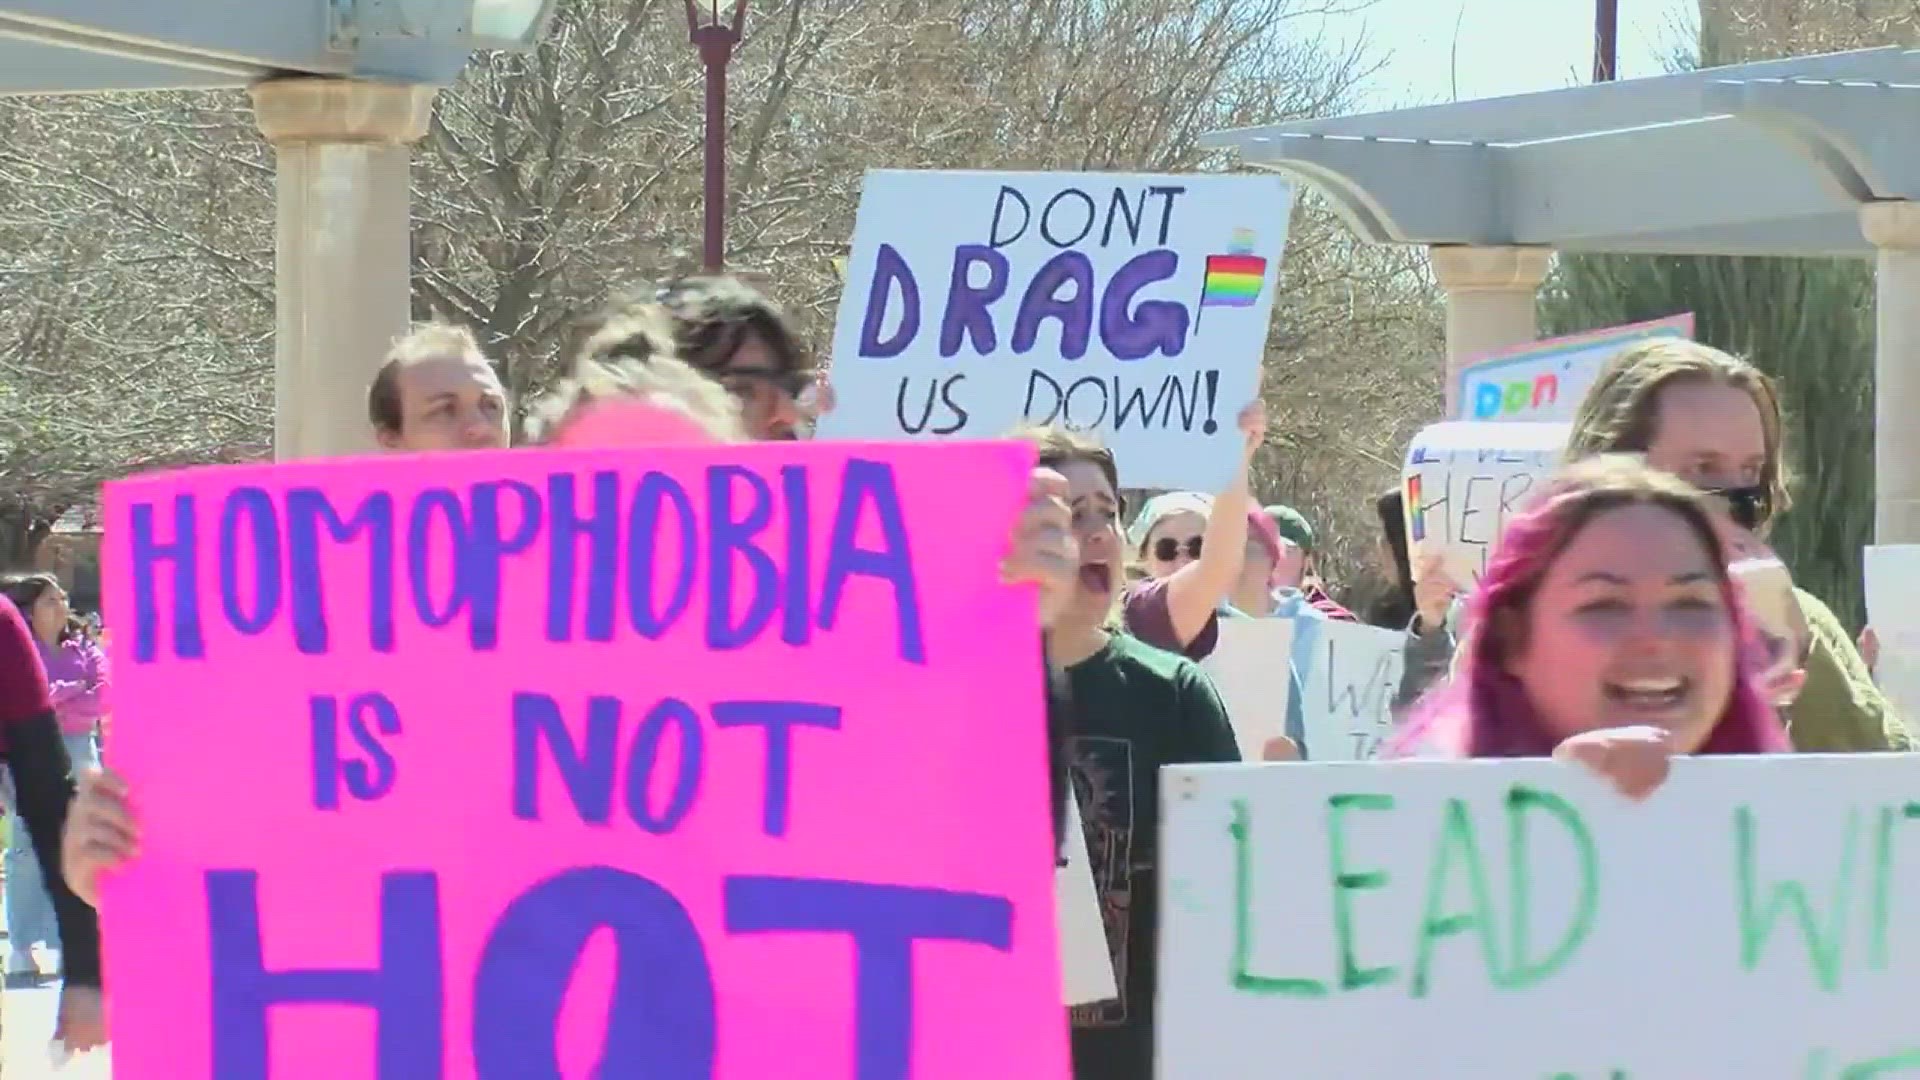 The lawsuit comes after protests each day this week, calling for university president Walter Wendler to reinstate the drag show and step down.